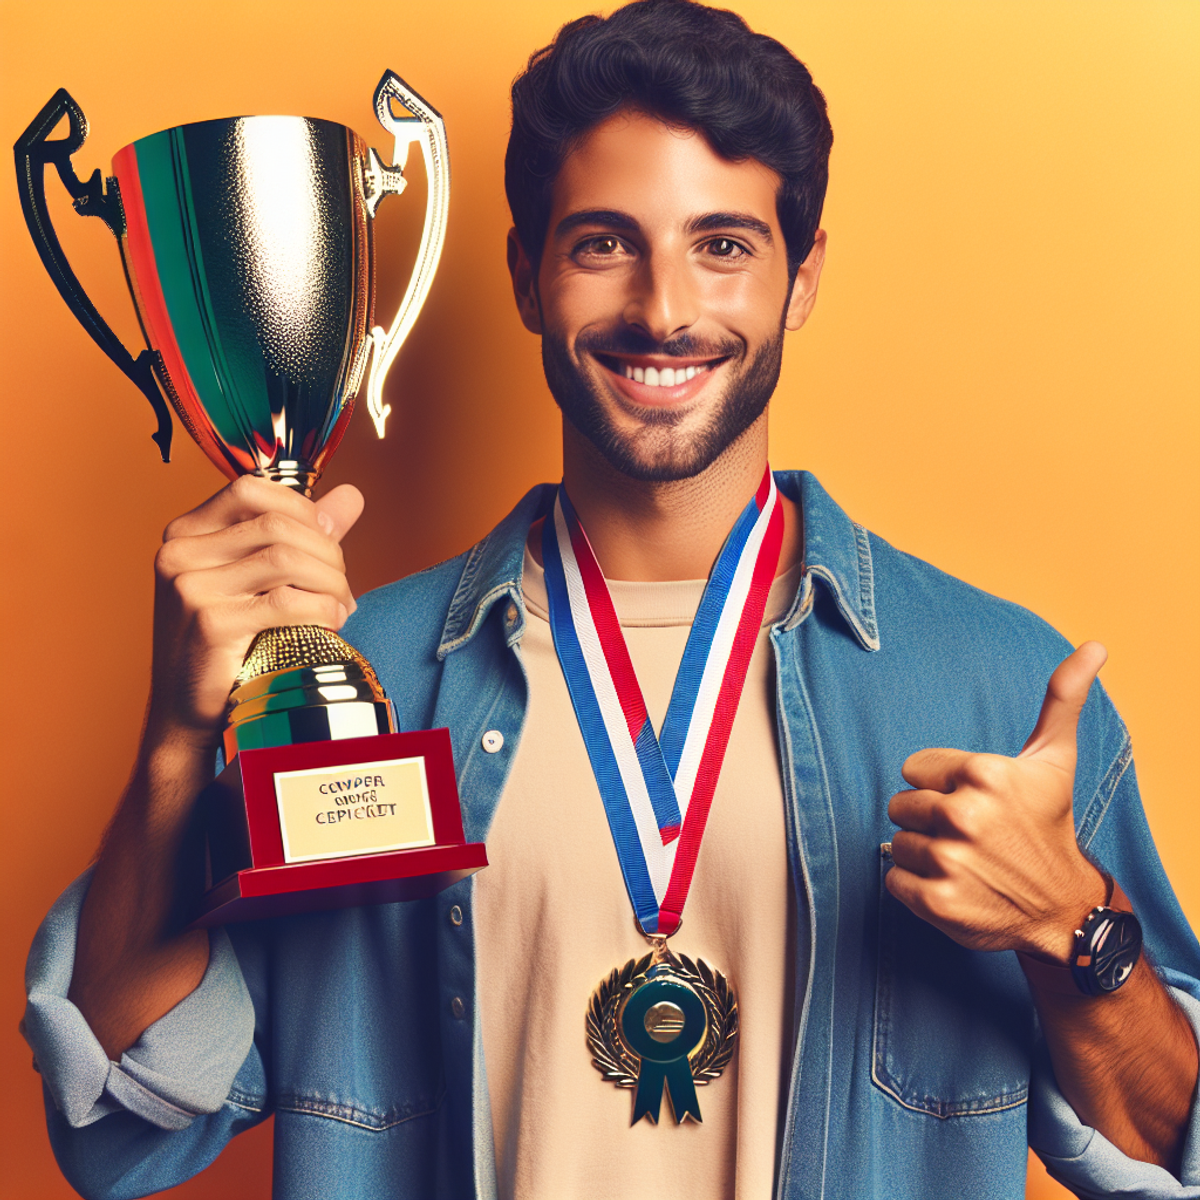 A confident Middle-Eastern man holding a vibrant trophy, smiling with a victory sign and a medal around his neck.